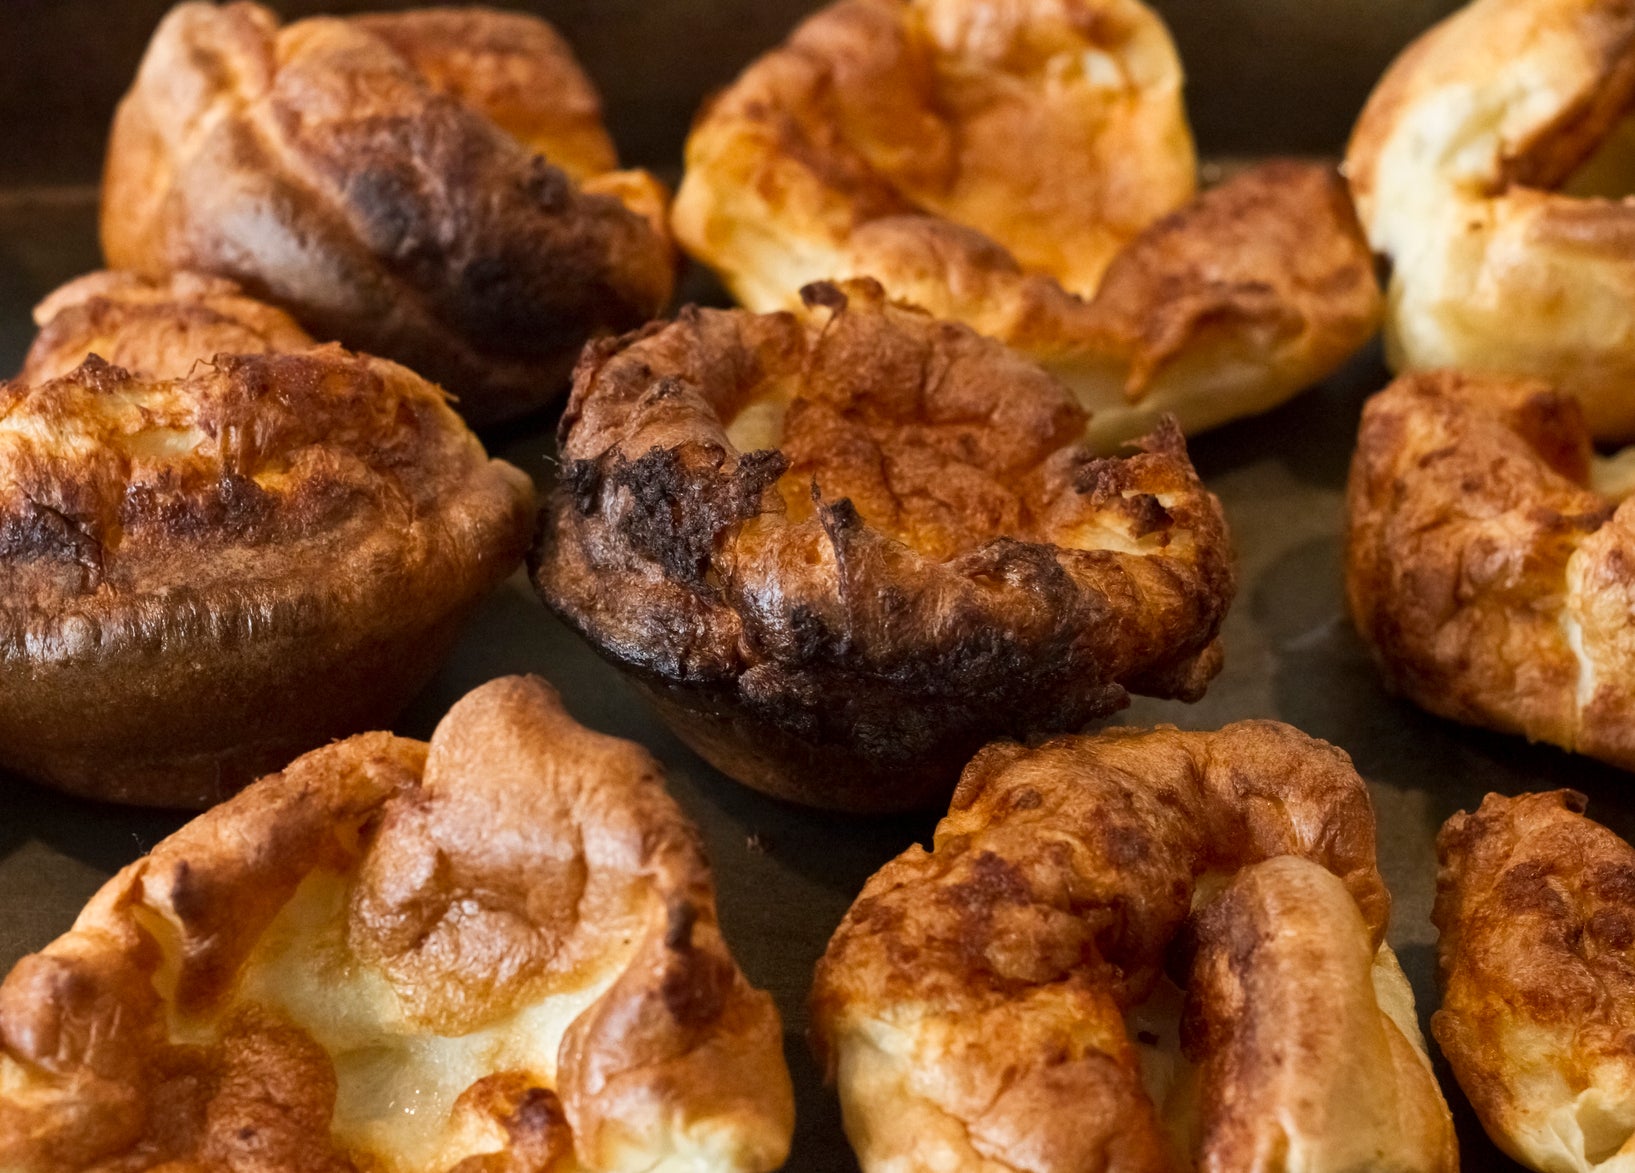 Yorkshire pudding is a "cloying puff of schizophrenic batter", according to Ed Cumming